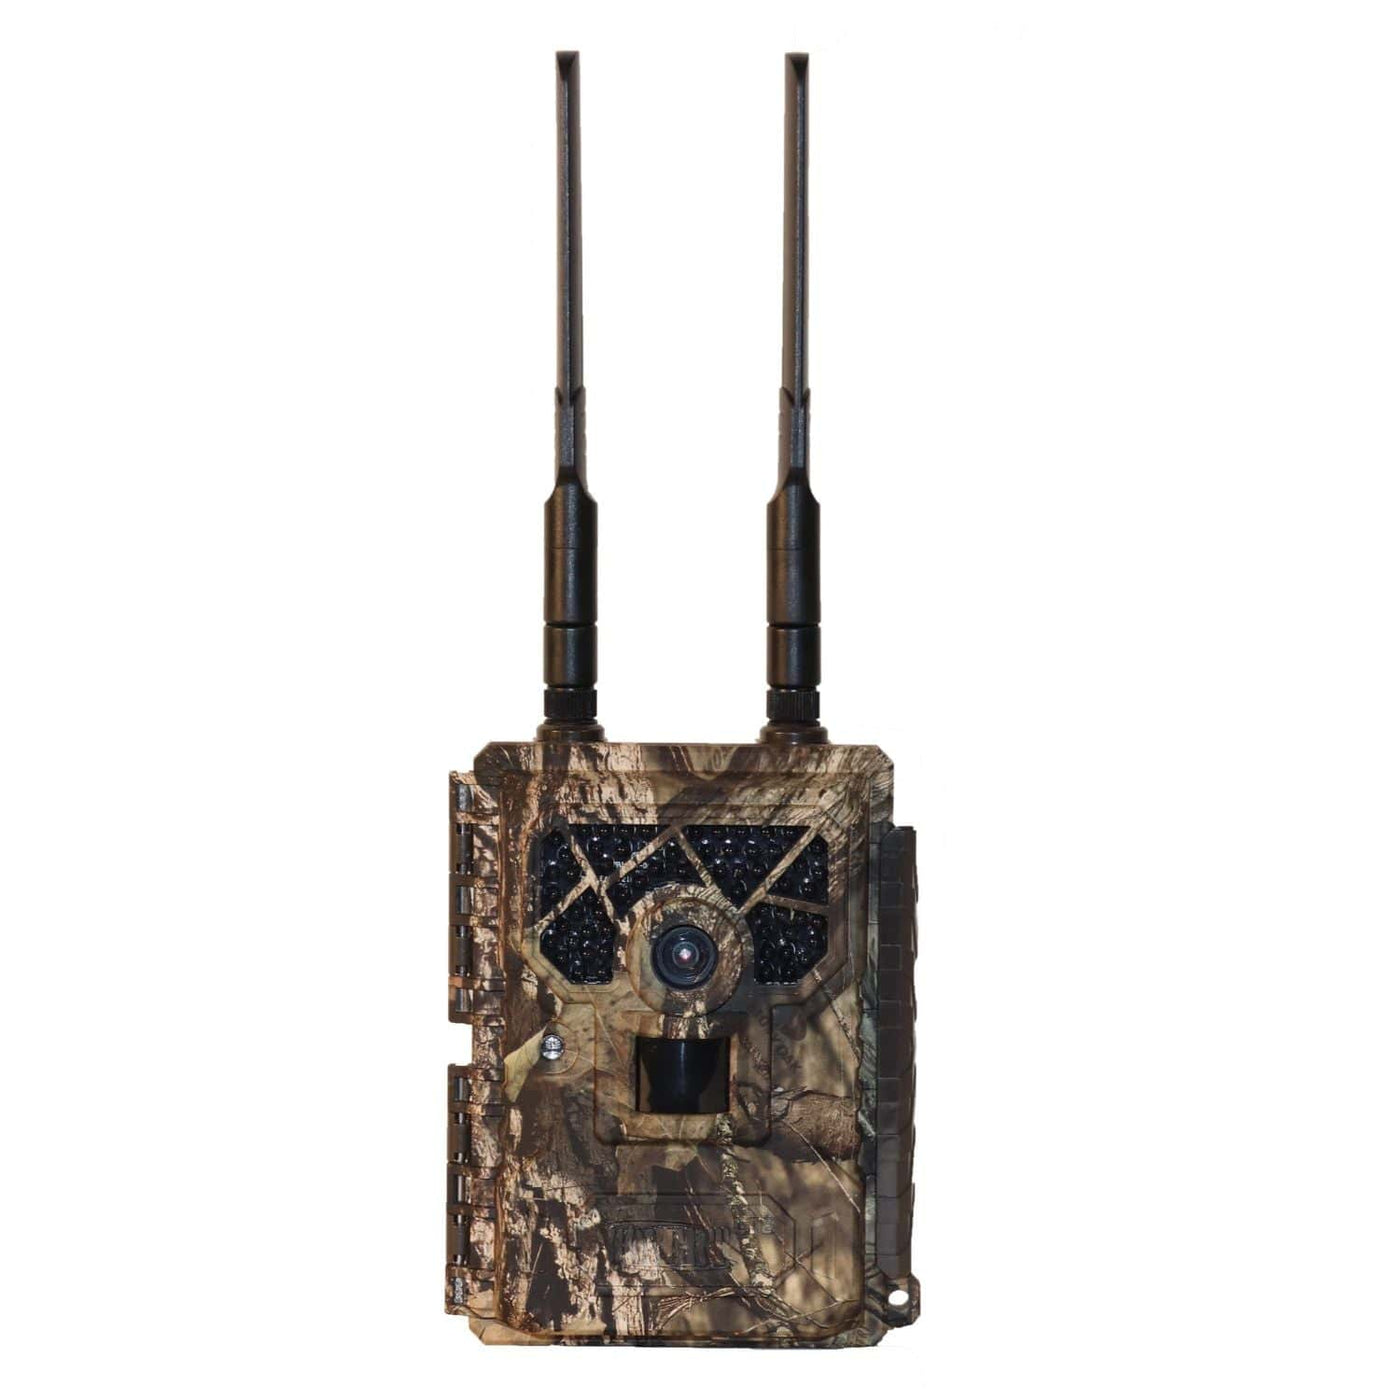 Covert Scouting Cameras Covert Blackhawk 20 LTE Hunting